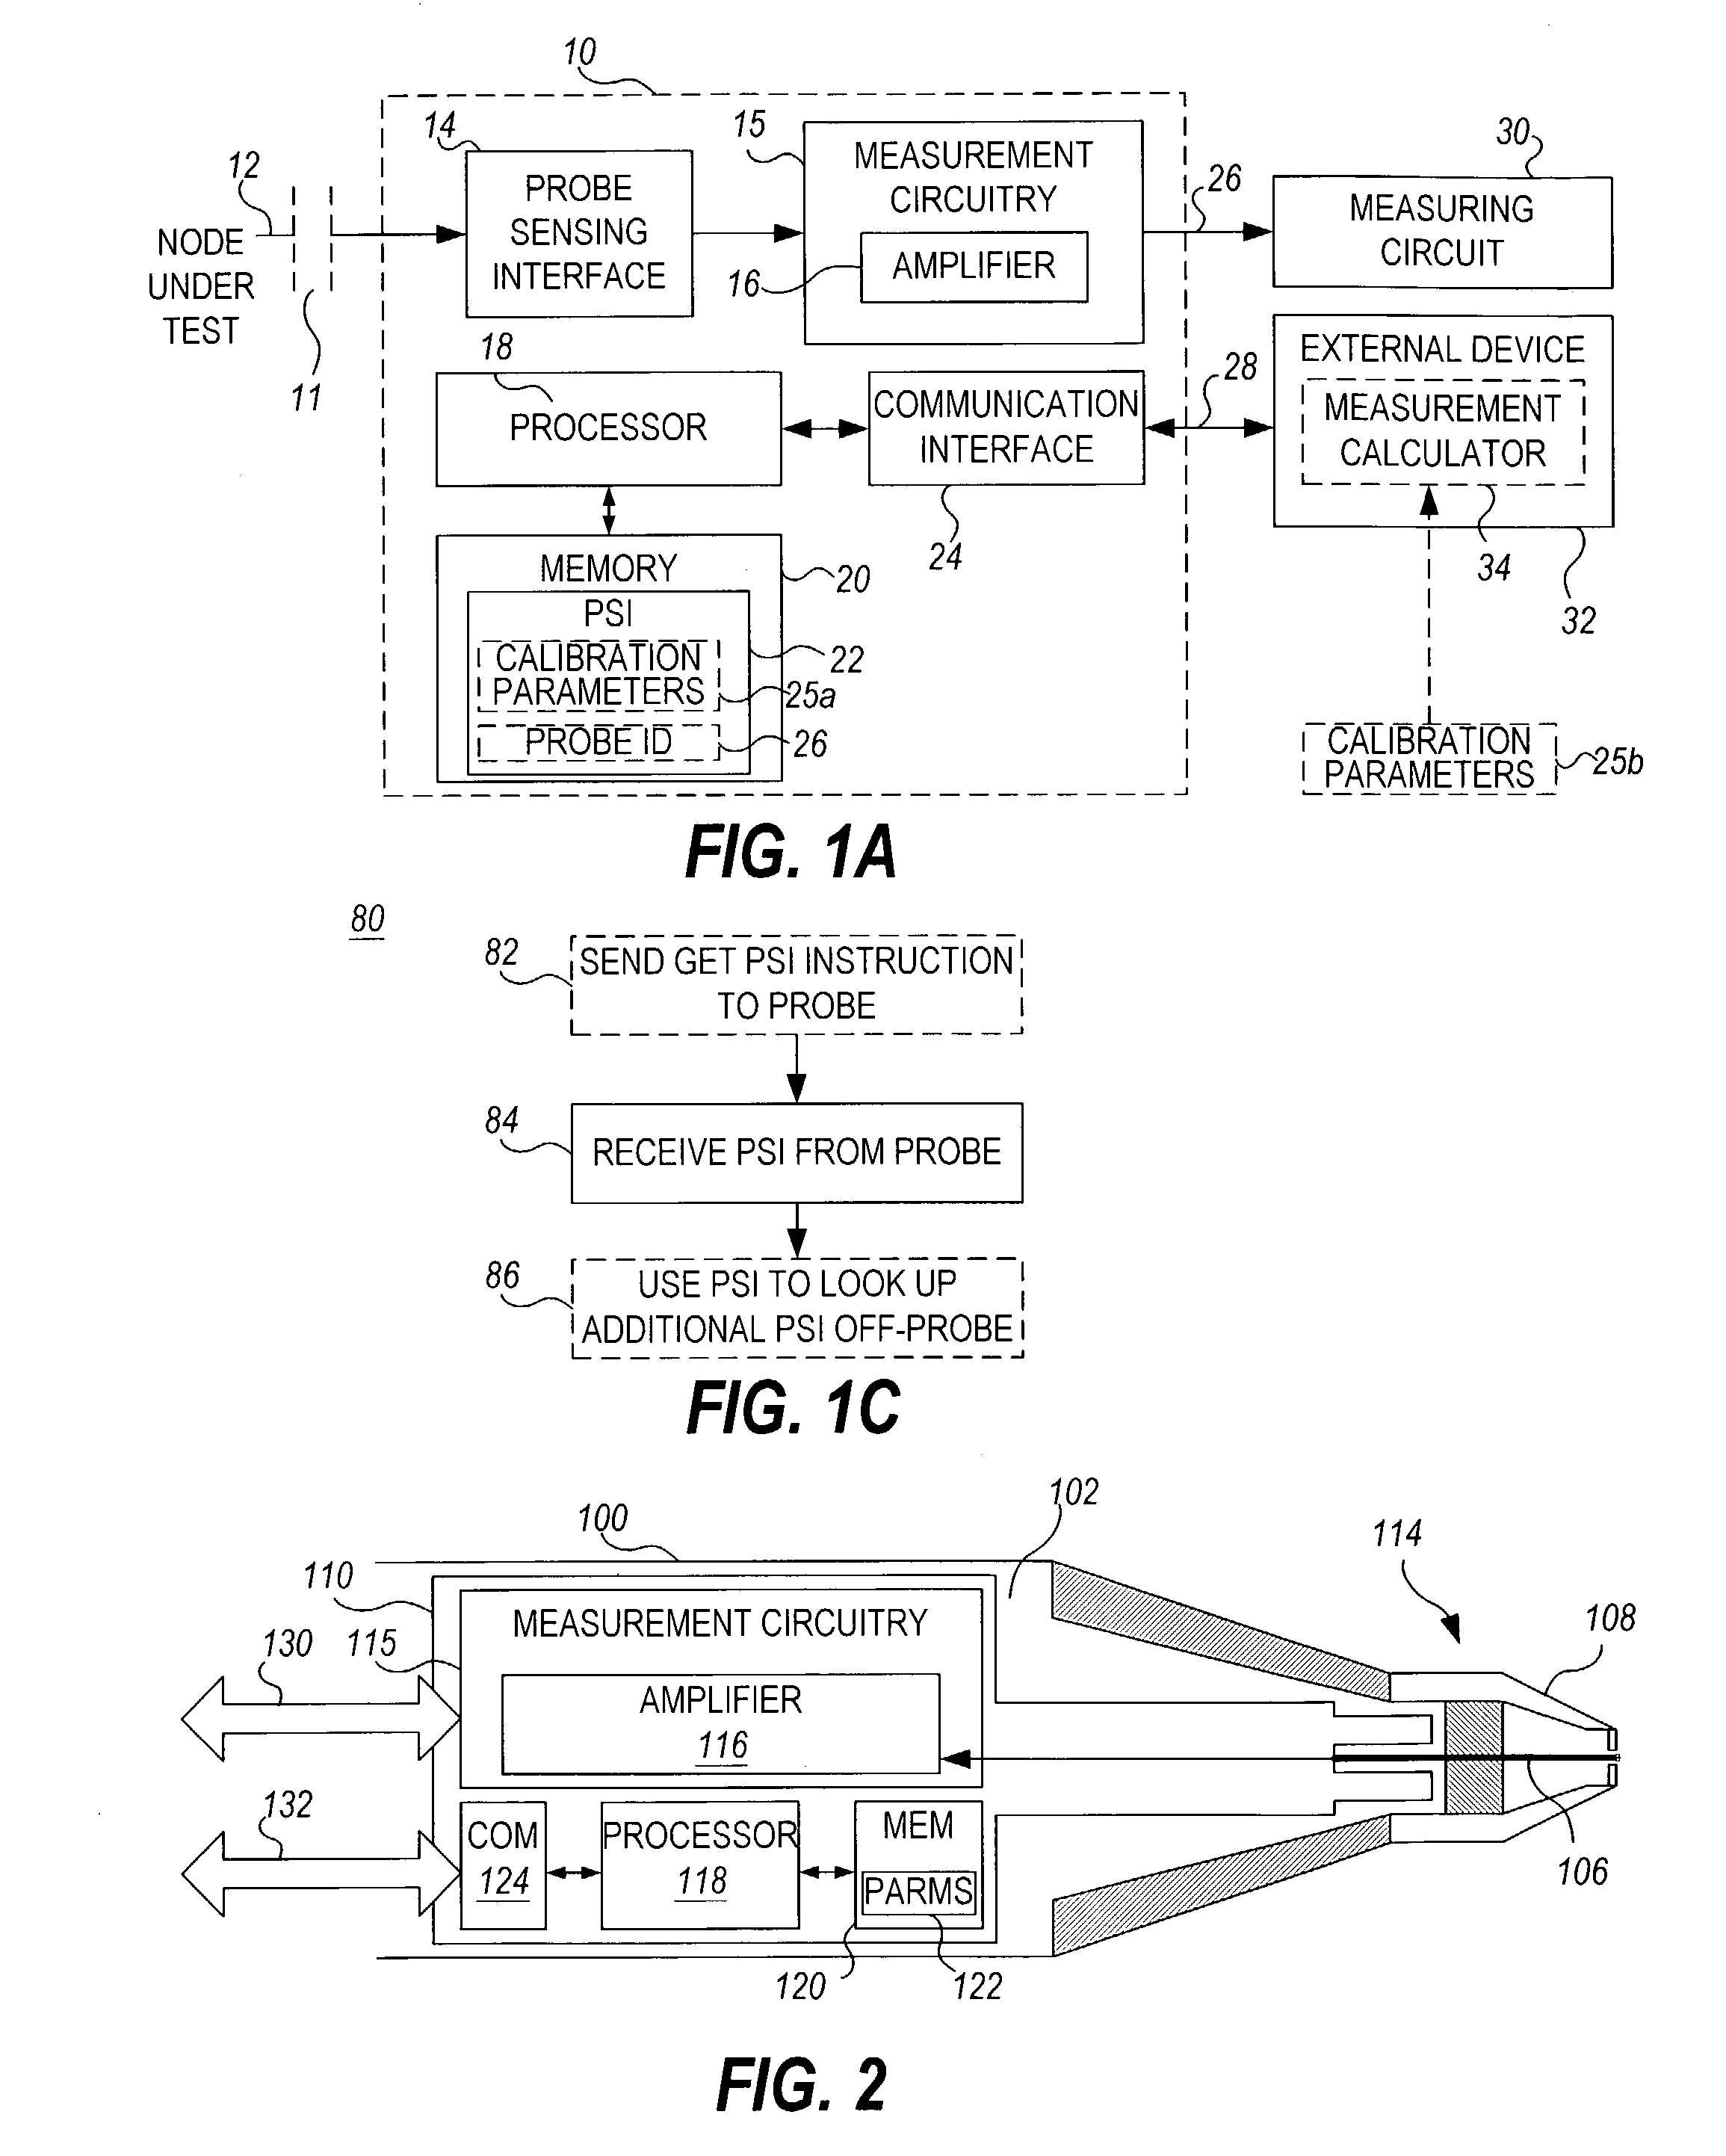 Probe based information storage for probes used for opens detection in in-circuit testing